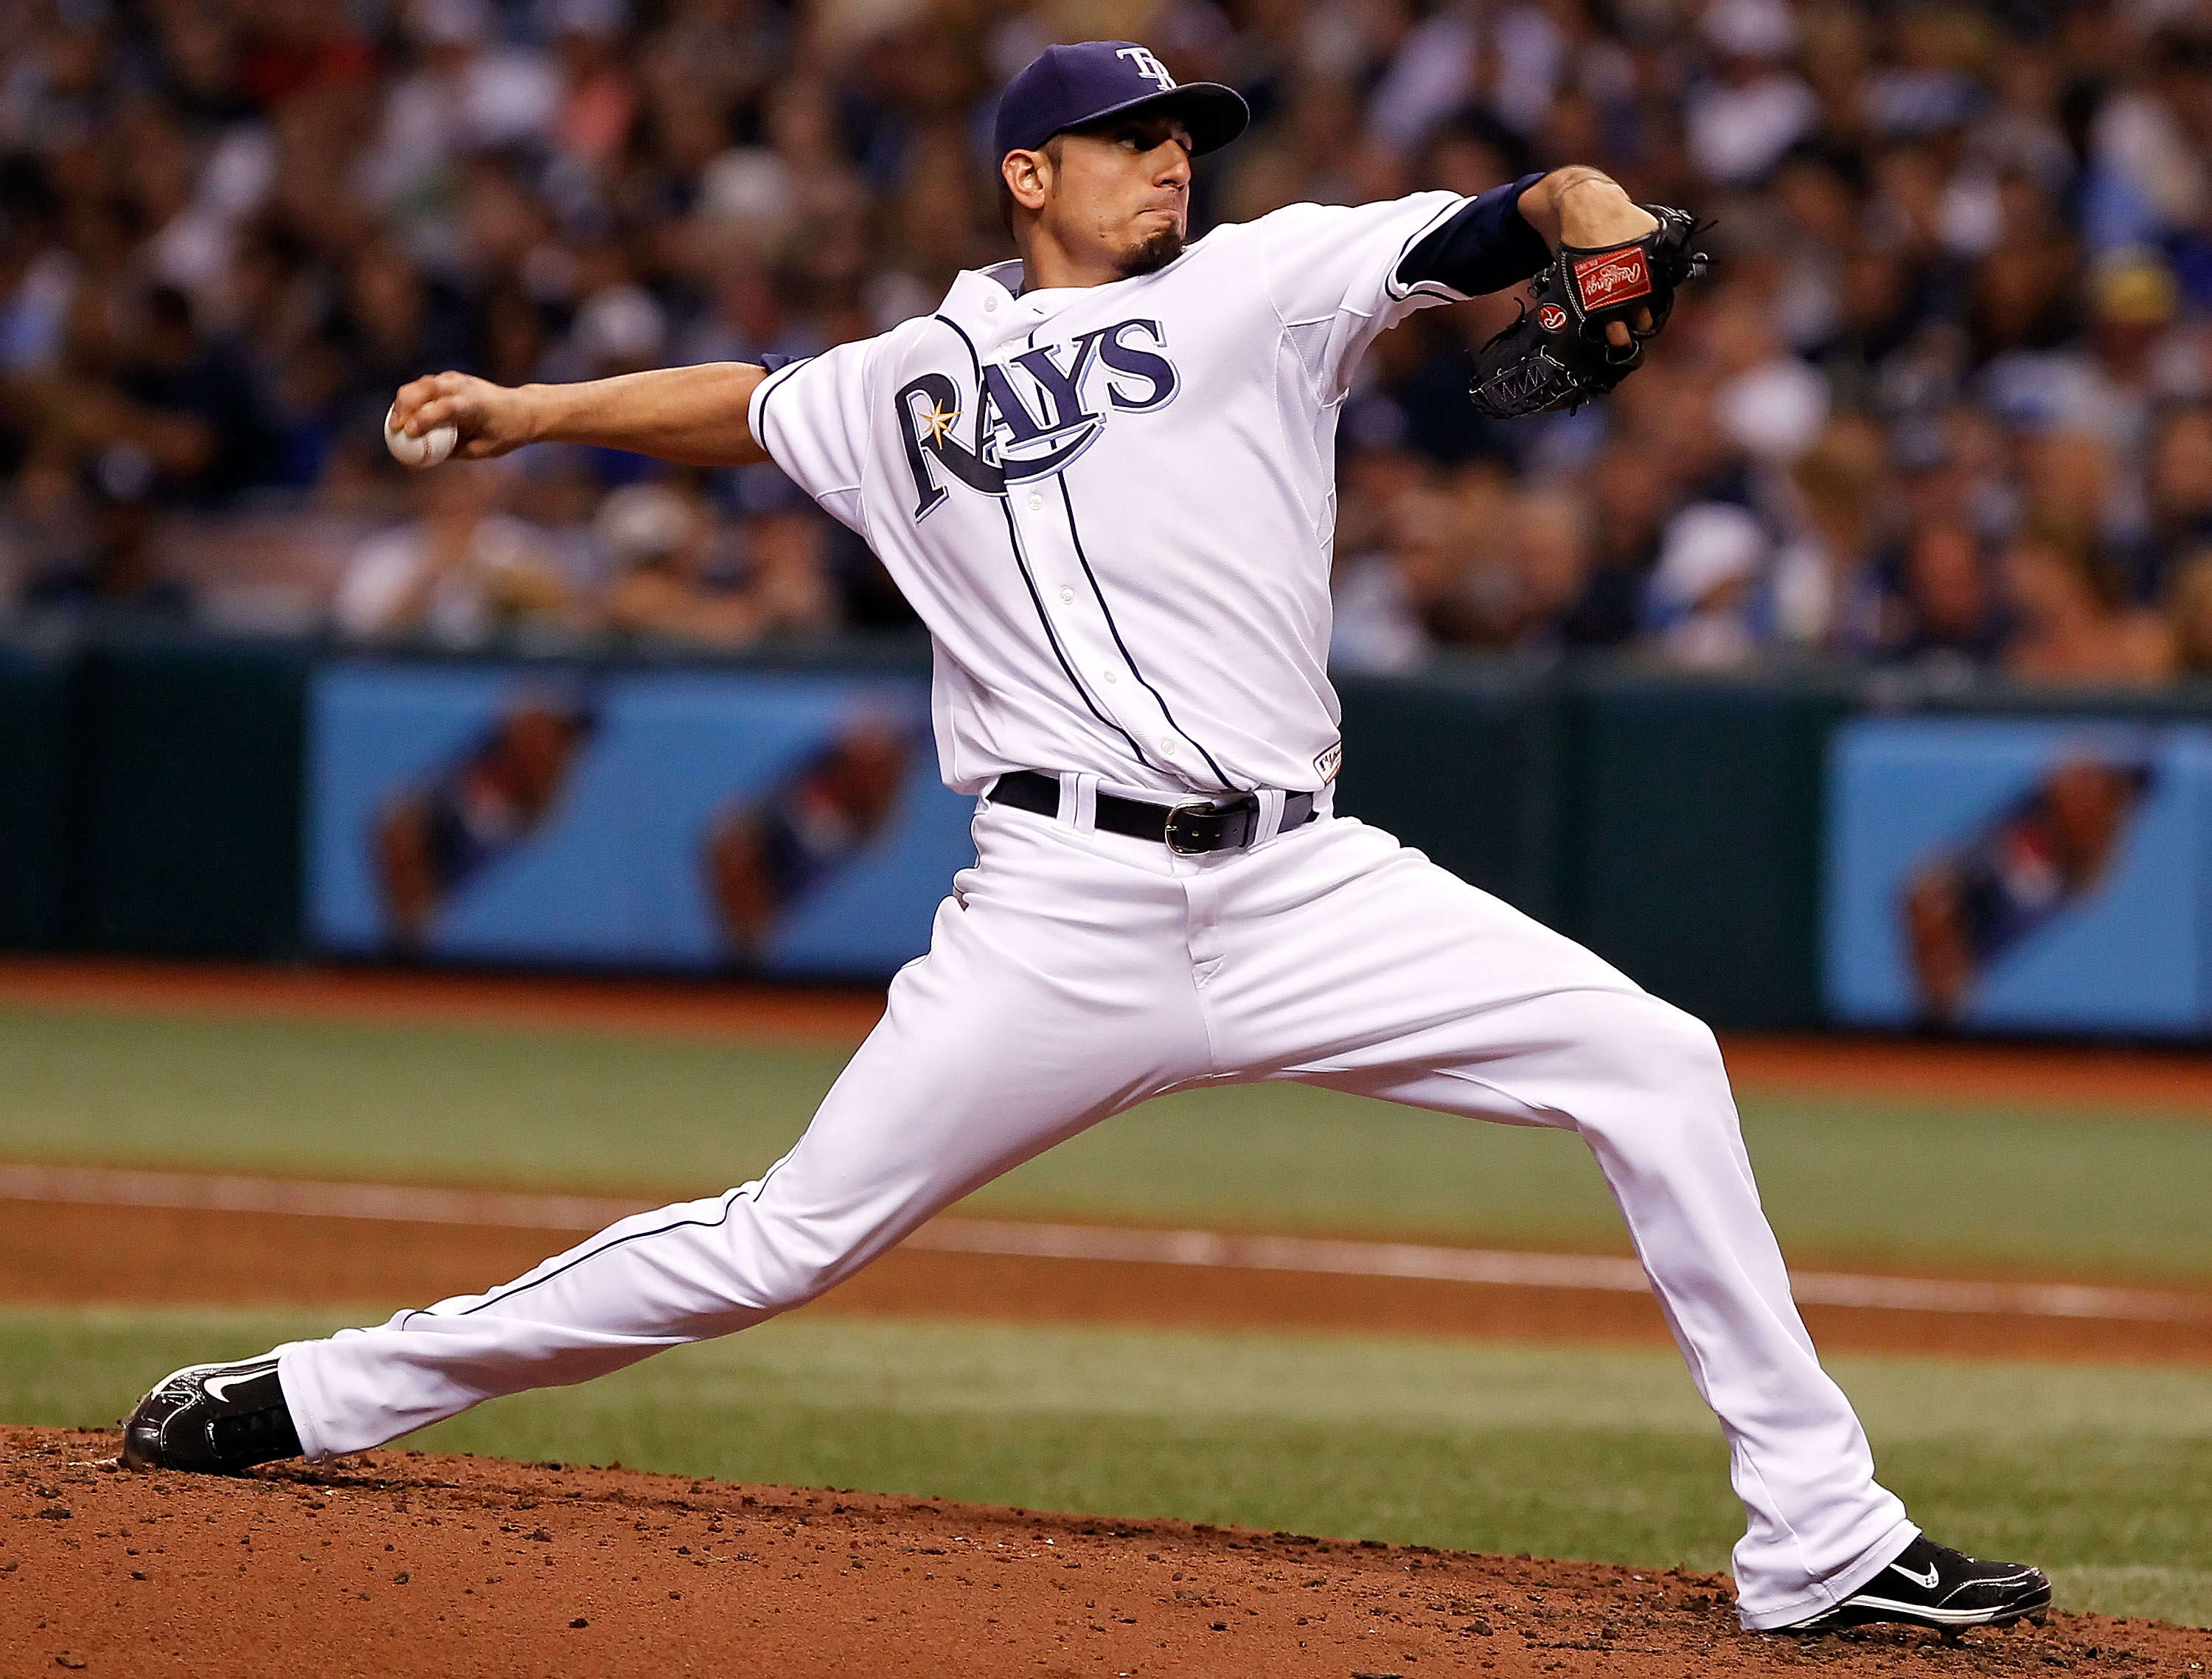 Garza could mean more to the Rays as an asset than as a pitcher in 2011